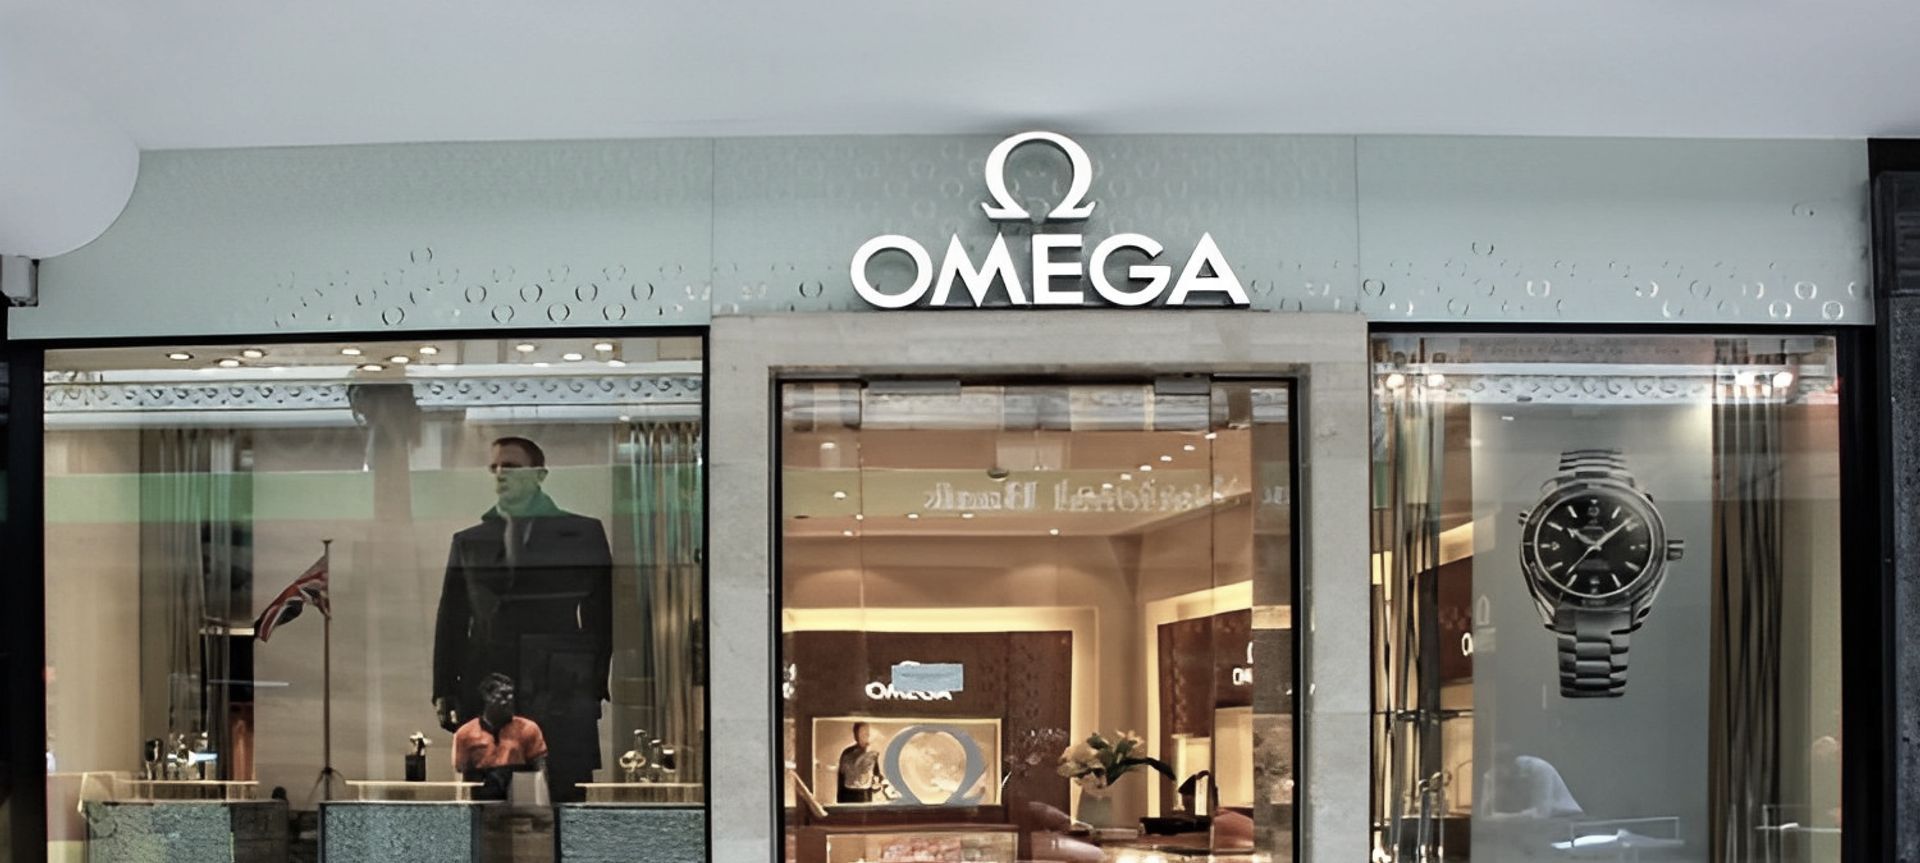 Luxury Stores - Omega & Tiffany & Co banner